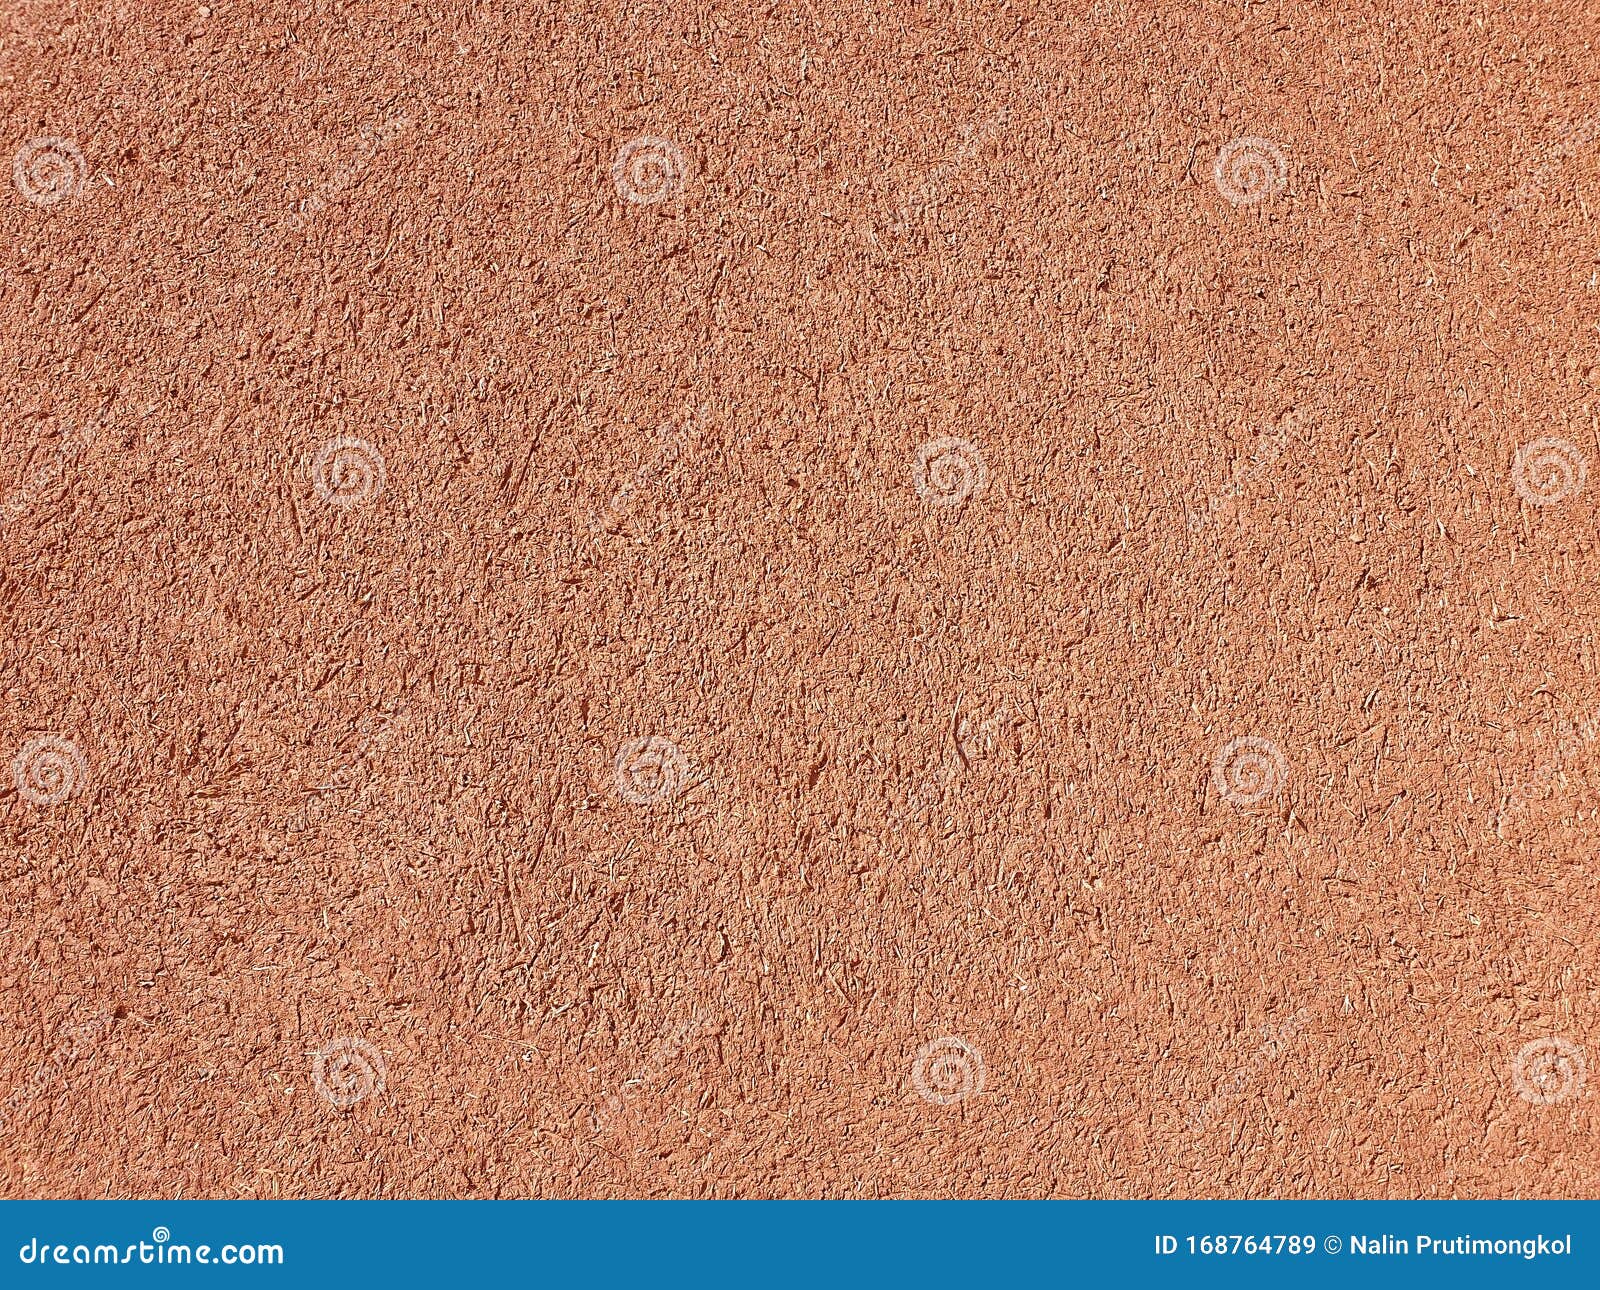 Background of the Red Clay Wall with Copy Space Stock Image - Image of color,  layers: 168764789